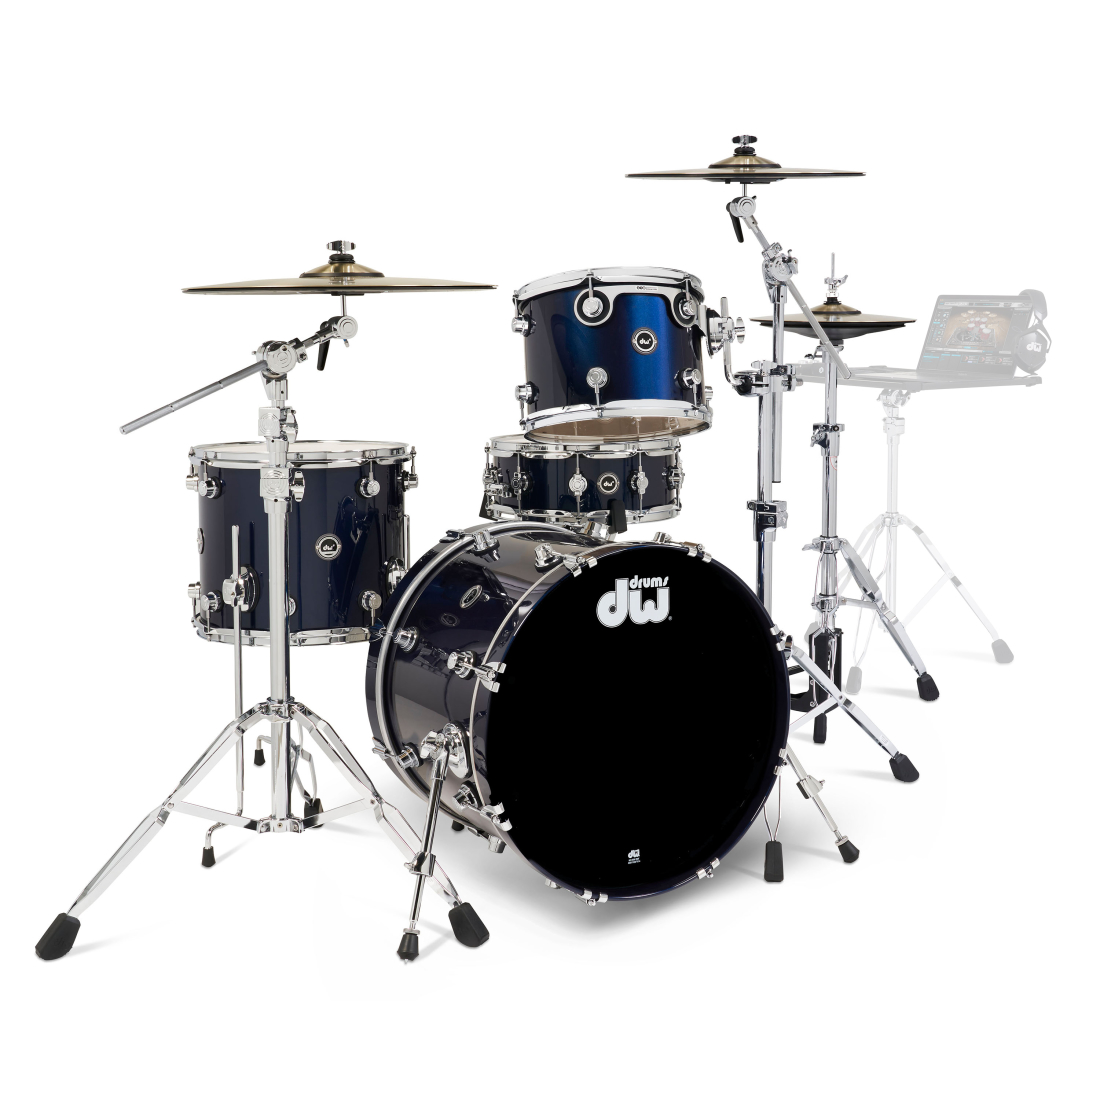 DWe 4-Piece Drumset with Cymbals and Hardware - Midnight Blue Metallic